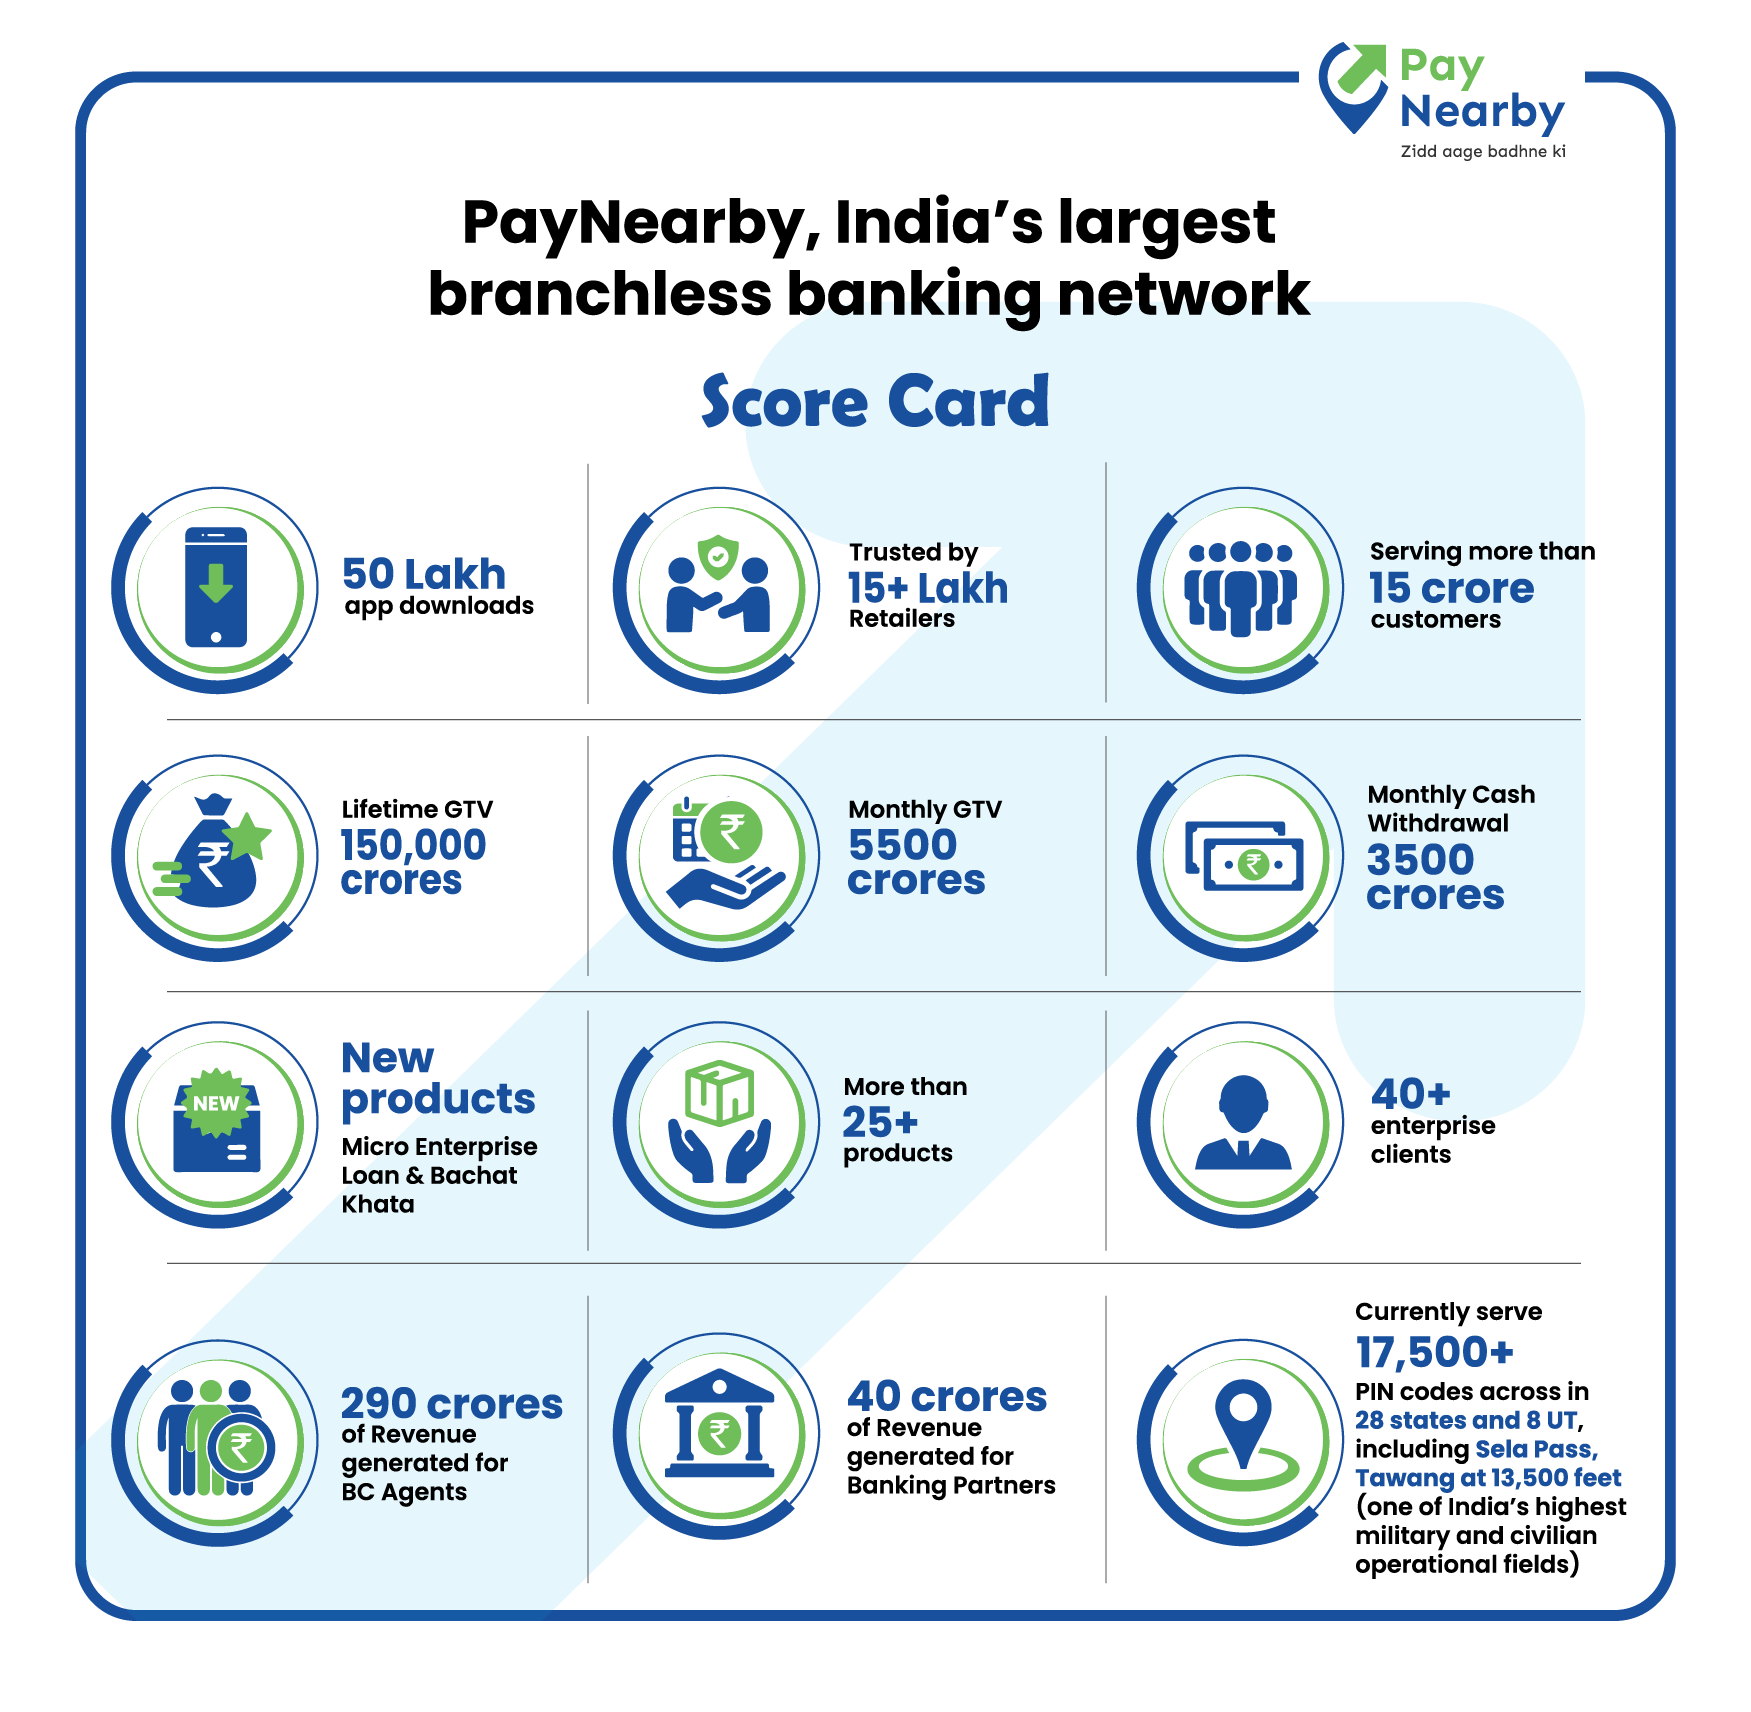 Amidst pandemic, PayNearby distributed Rs. 54,000 Cr of assisted digital services in FY 20-21